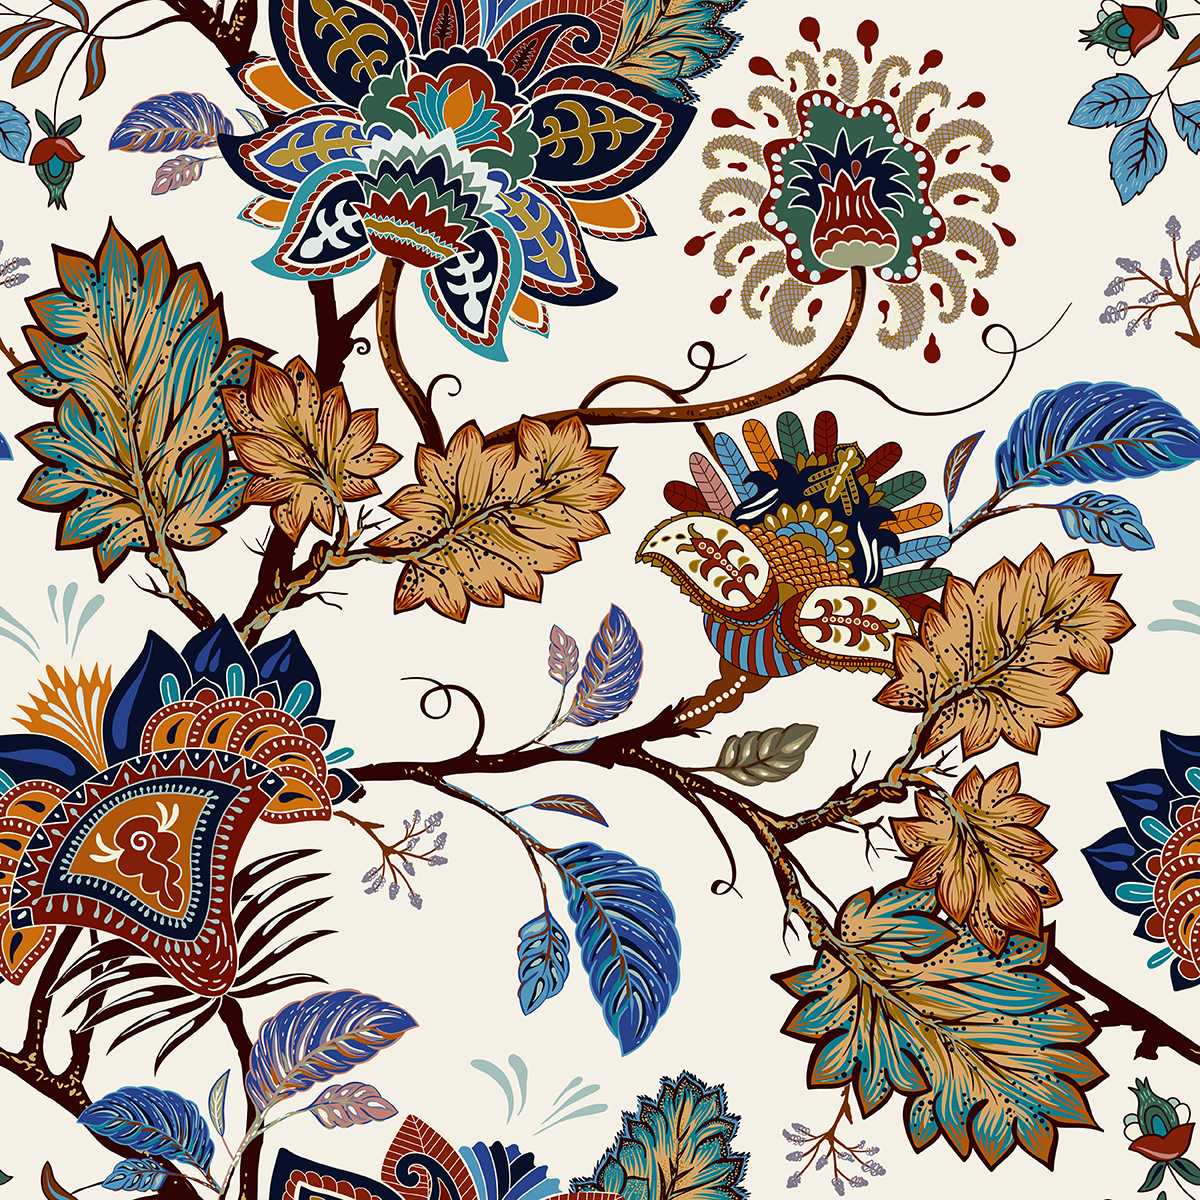 A colorful floral pattern on a white background